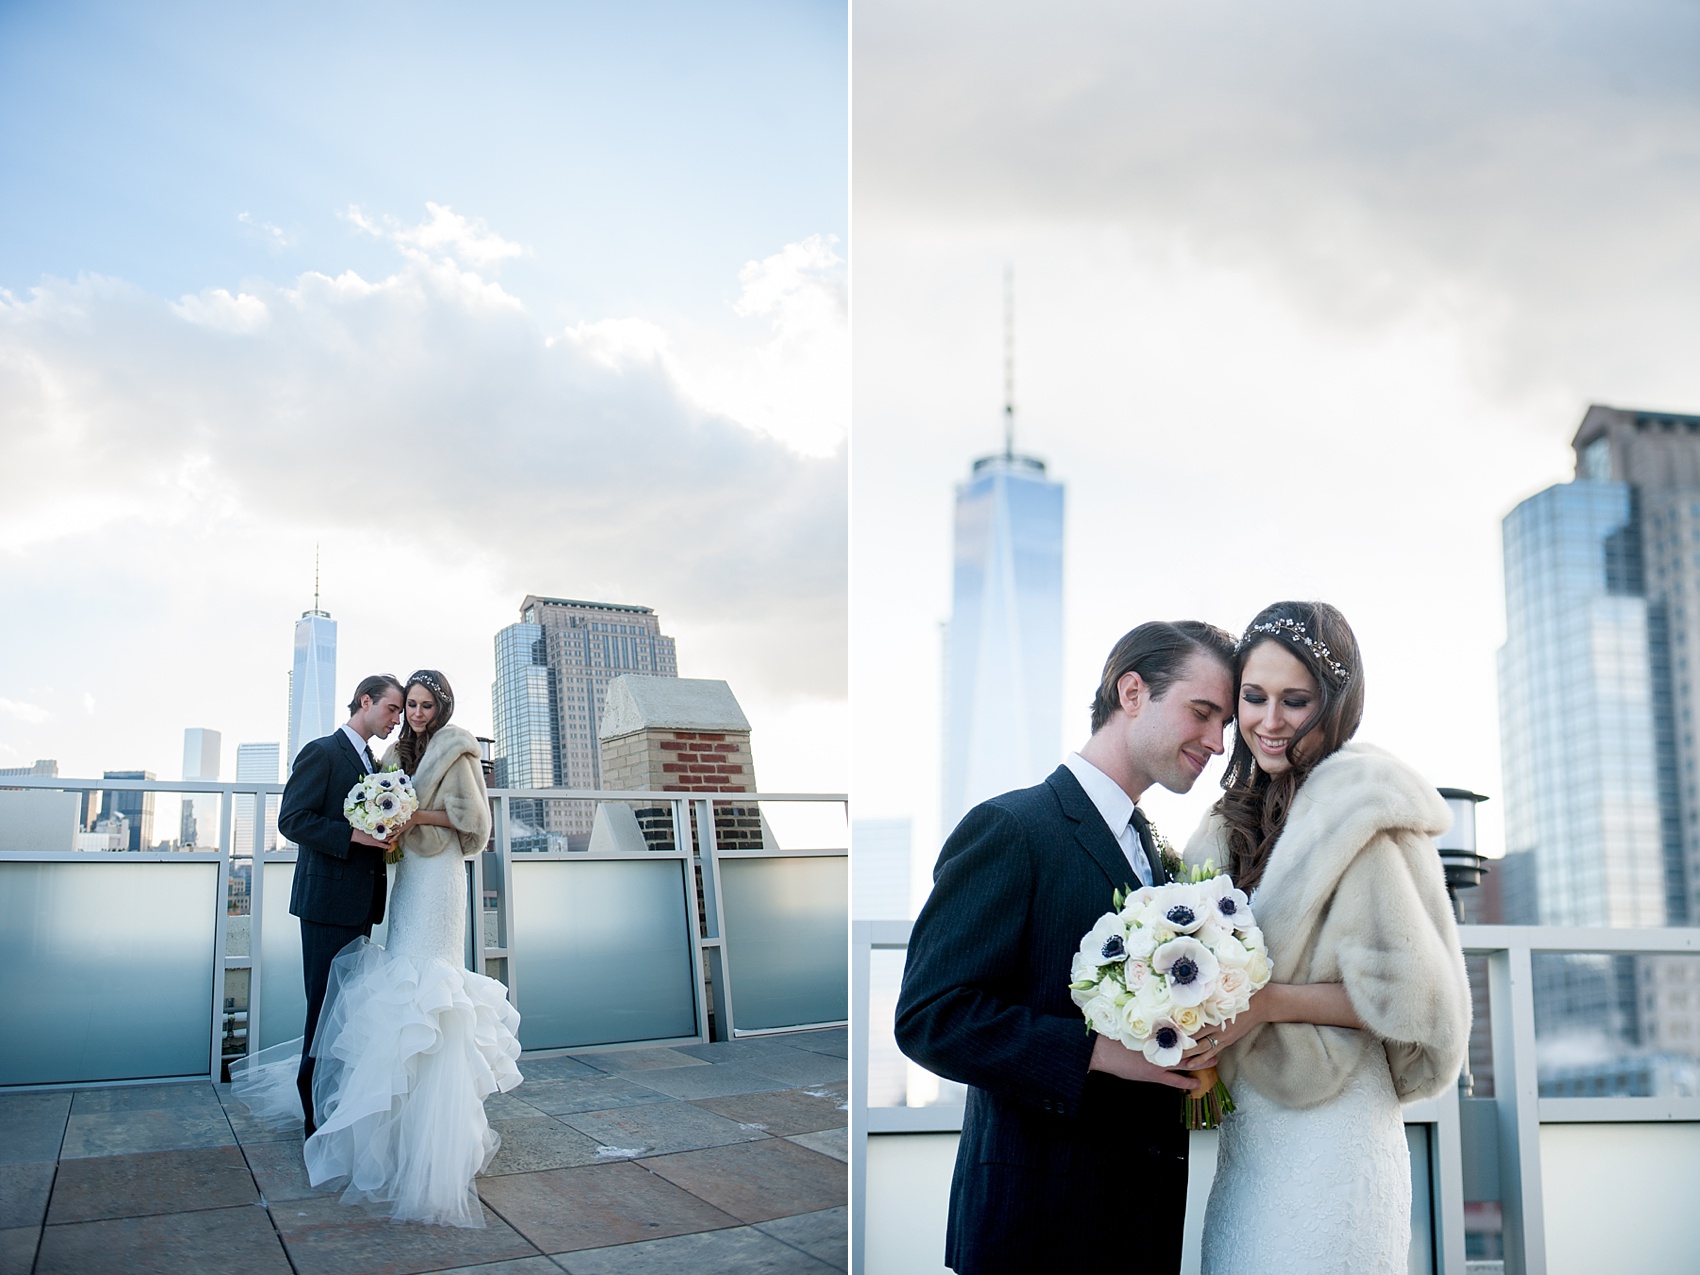 Black and gold wedding inspiration photo shoot in NYC. Photos by Mikkel Paige Photography.